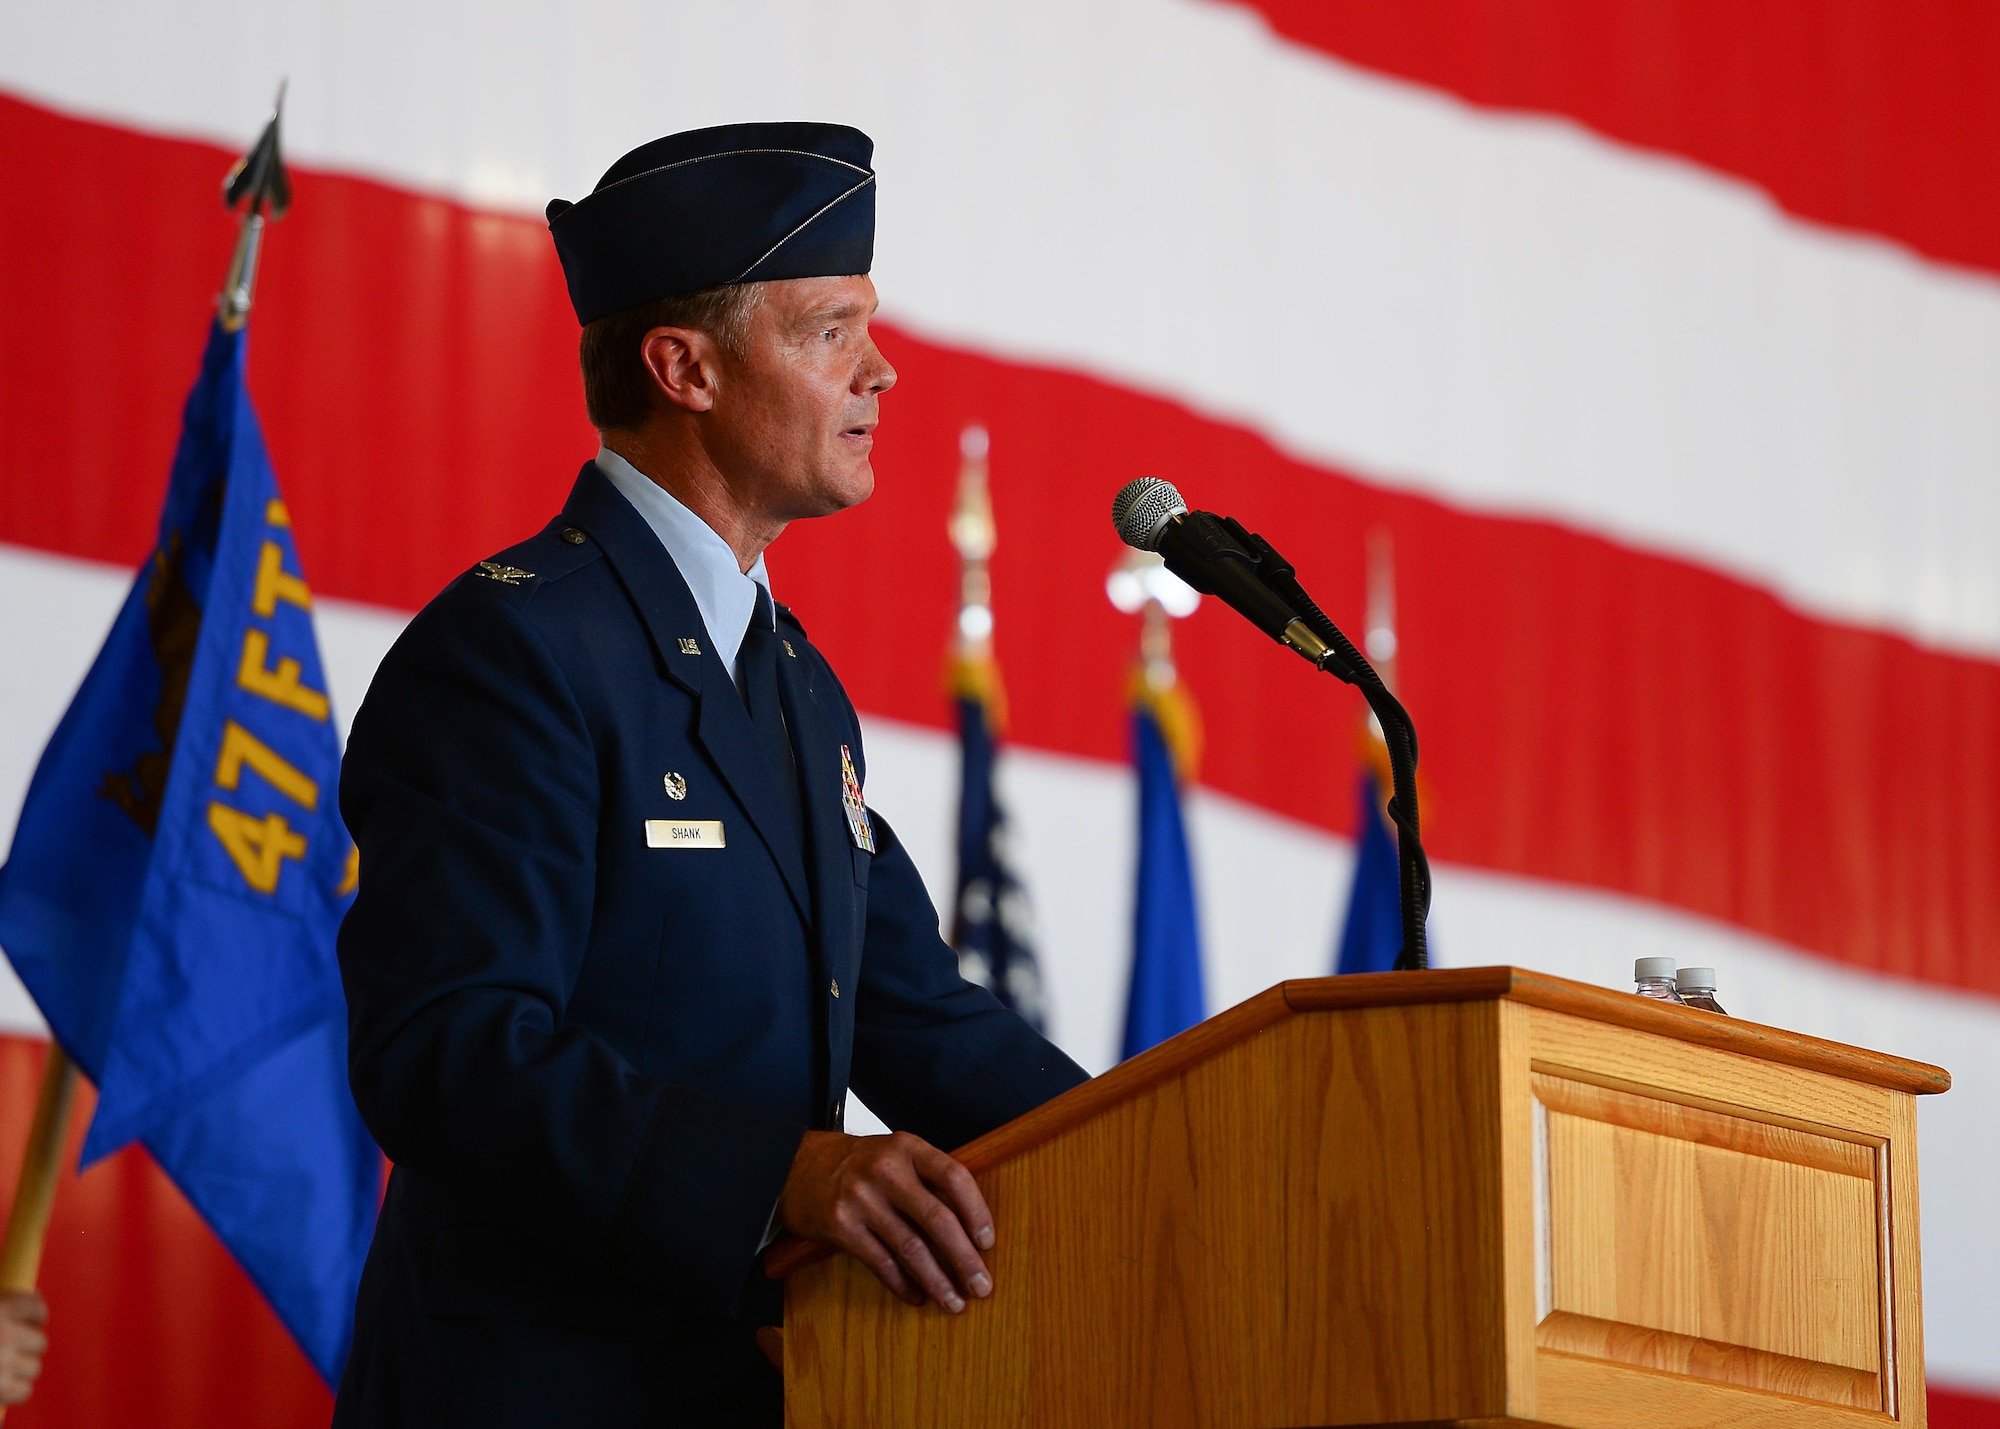 Outgoing commander, U.S. Air Force Col. Thomas Shank gives remarks during the 47th Flying Training Wing’s change of command ceremony at Laughlin Air Force Base, Tx., June 28, 2017.  Col. Shank, a command pilot with over 3,000 flight hours, directed the Air Force’s largest training operation, which exceeds over 80,000 flying hours and 54,000 sorties.